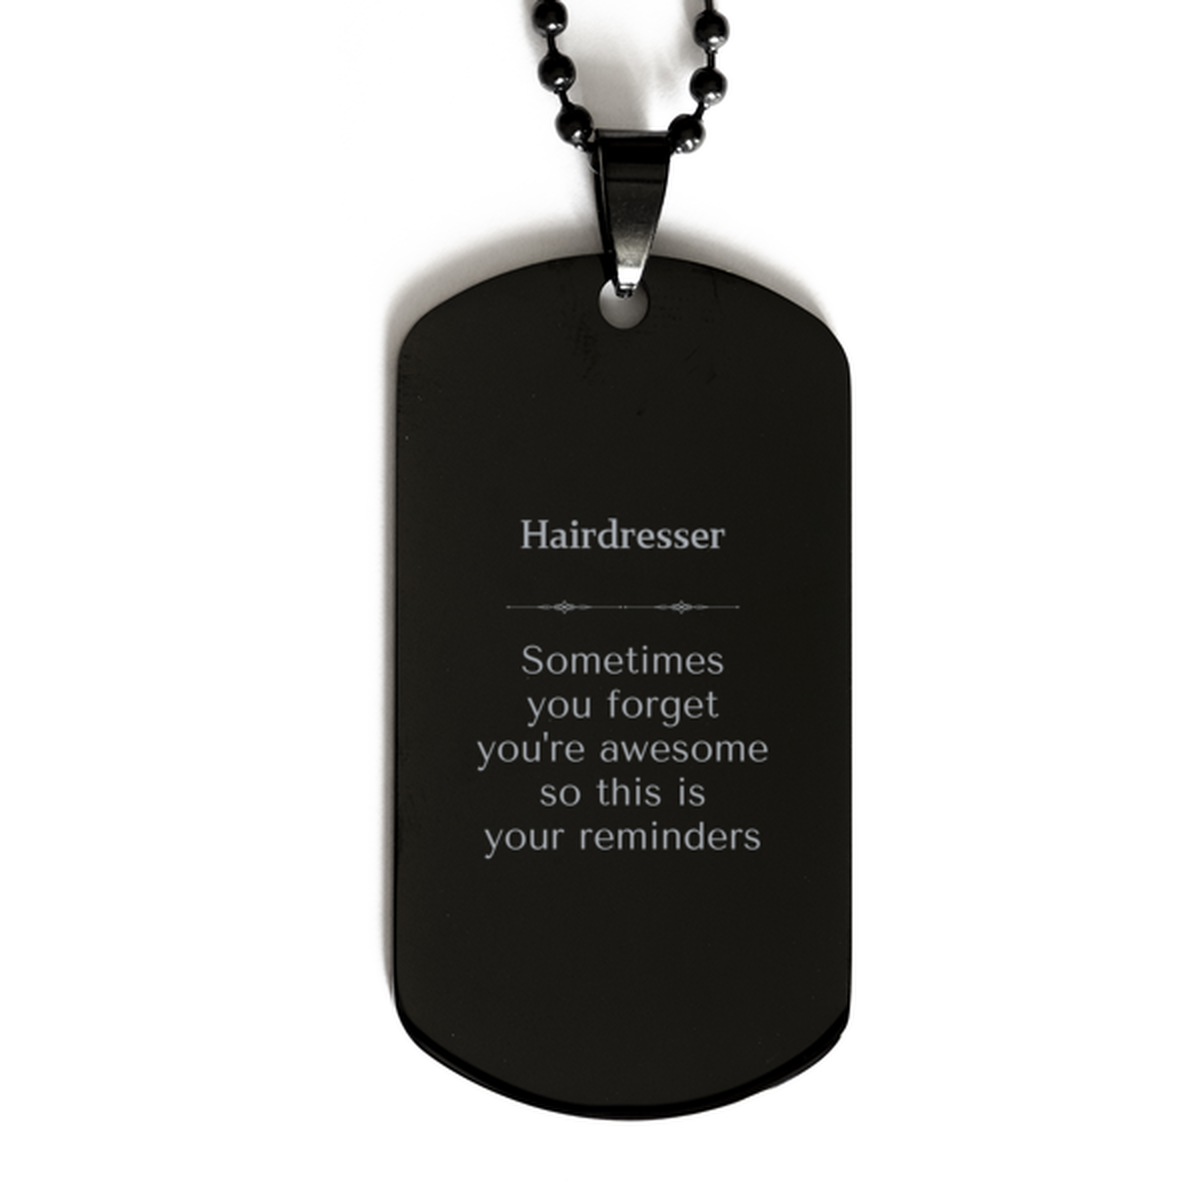 Sentimental Hairdresser Black Dog Tag, Hairdresser Sometimes you forget you're awesome so this is your reminders, Graduation Christmas Birthday Gifts for Hairdresser, Men, Women, Coworkers